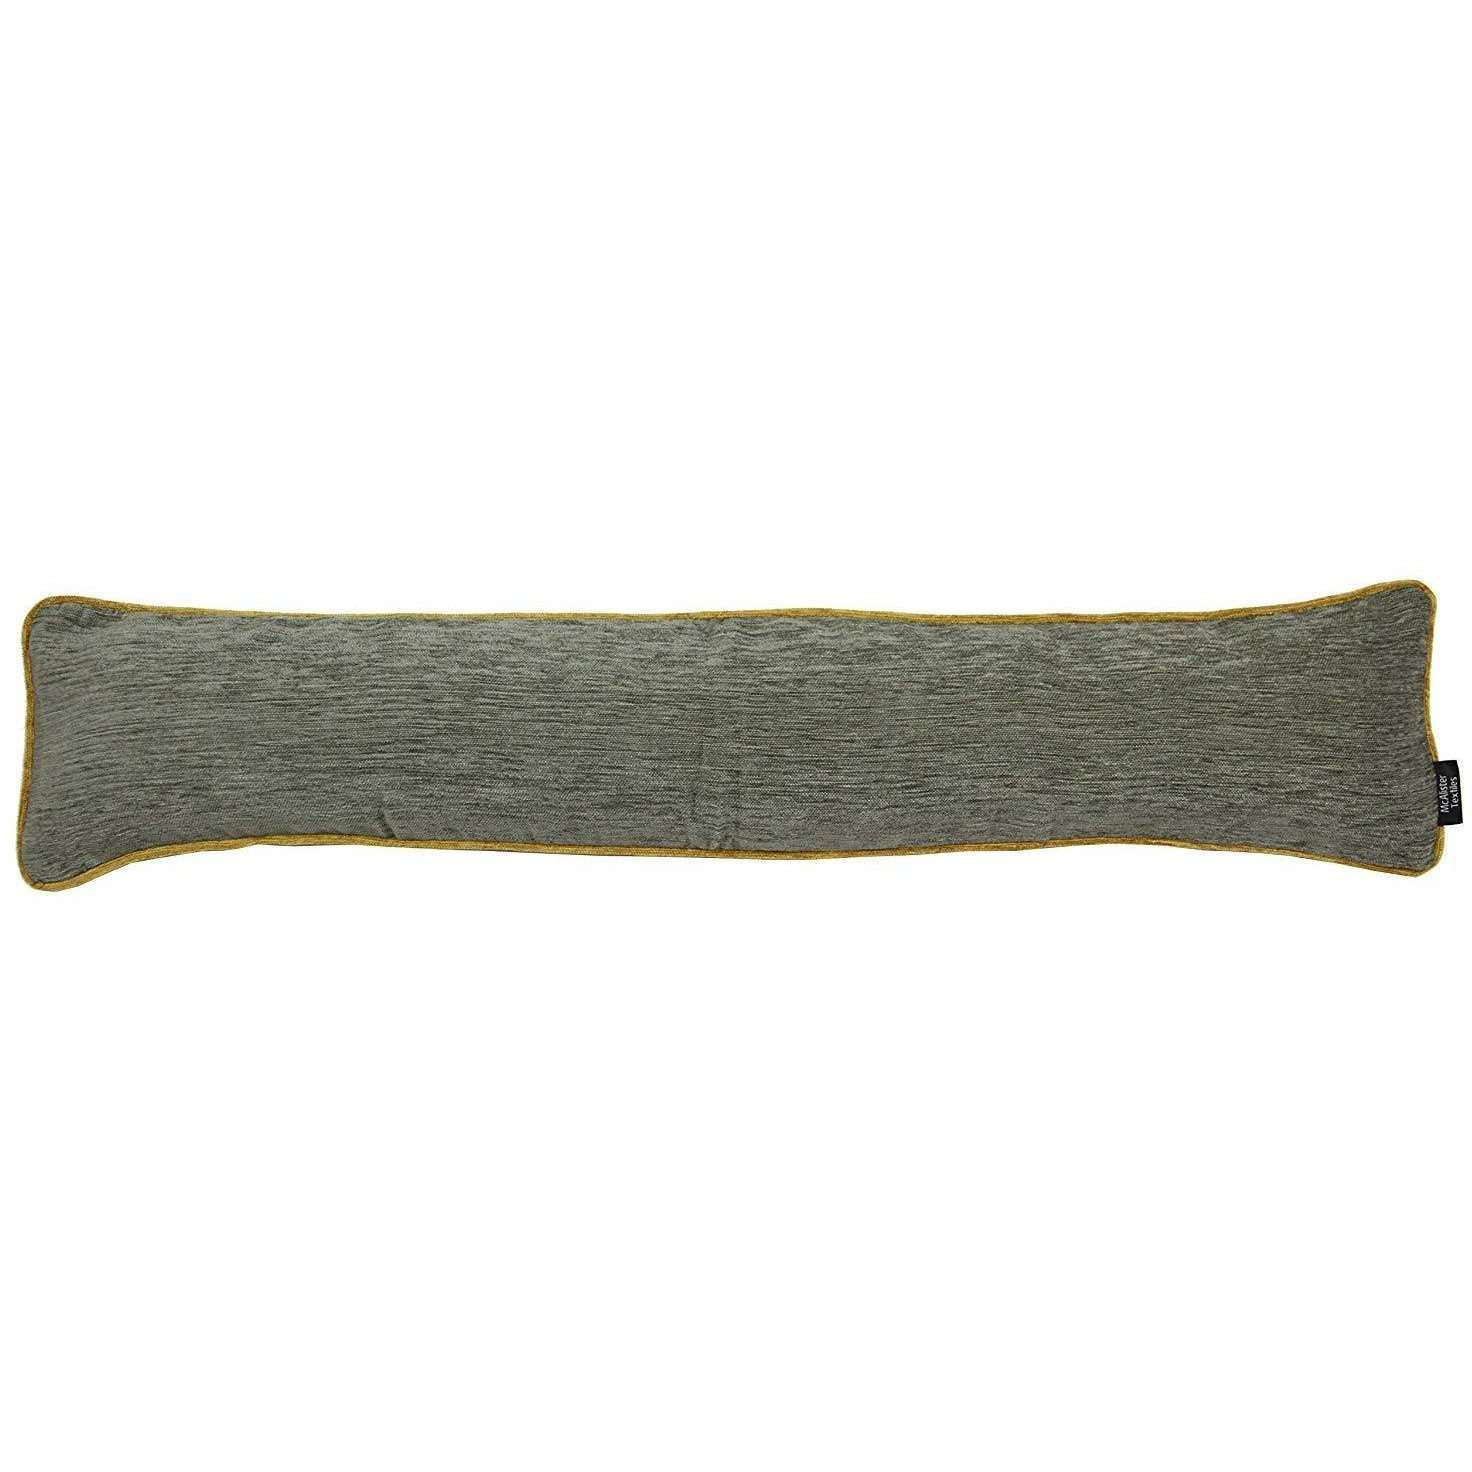 Plain Chenille Contrast Piped Grey + Yellow Draught Excluder, 18cm x 100cm